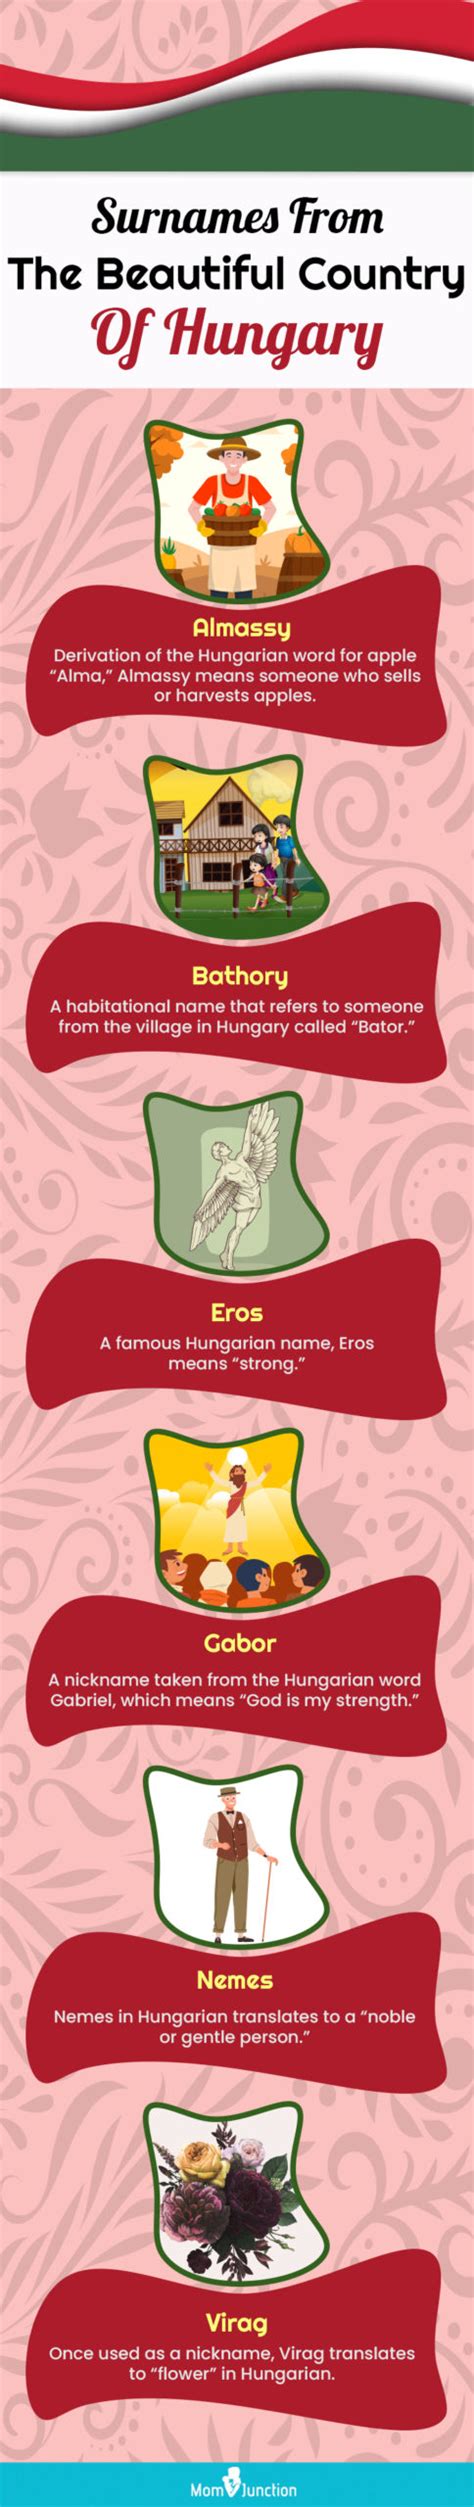 100 Popular Hungarian Surnames Or Last Names With Meanings